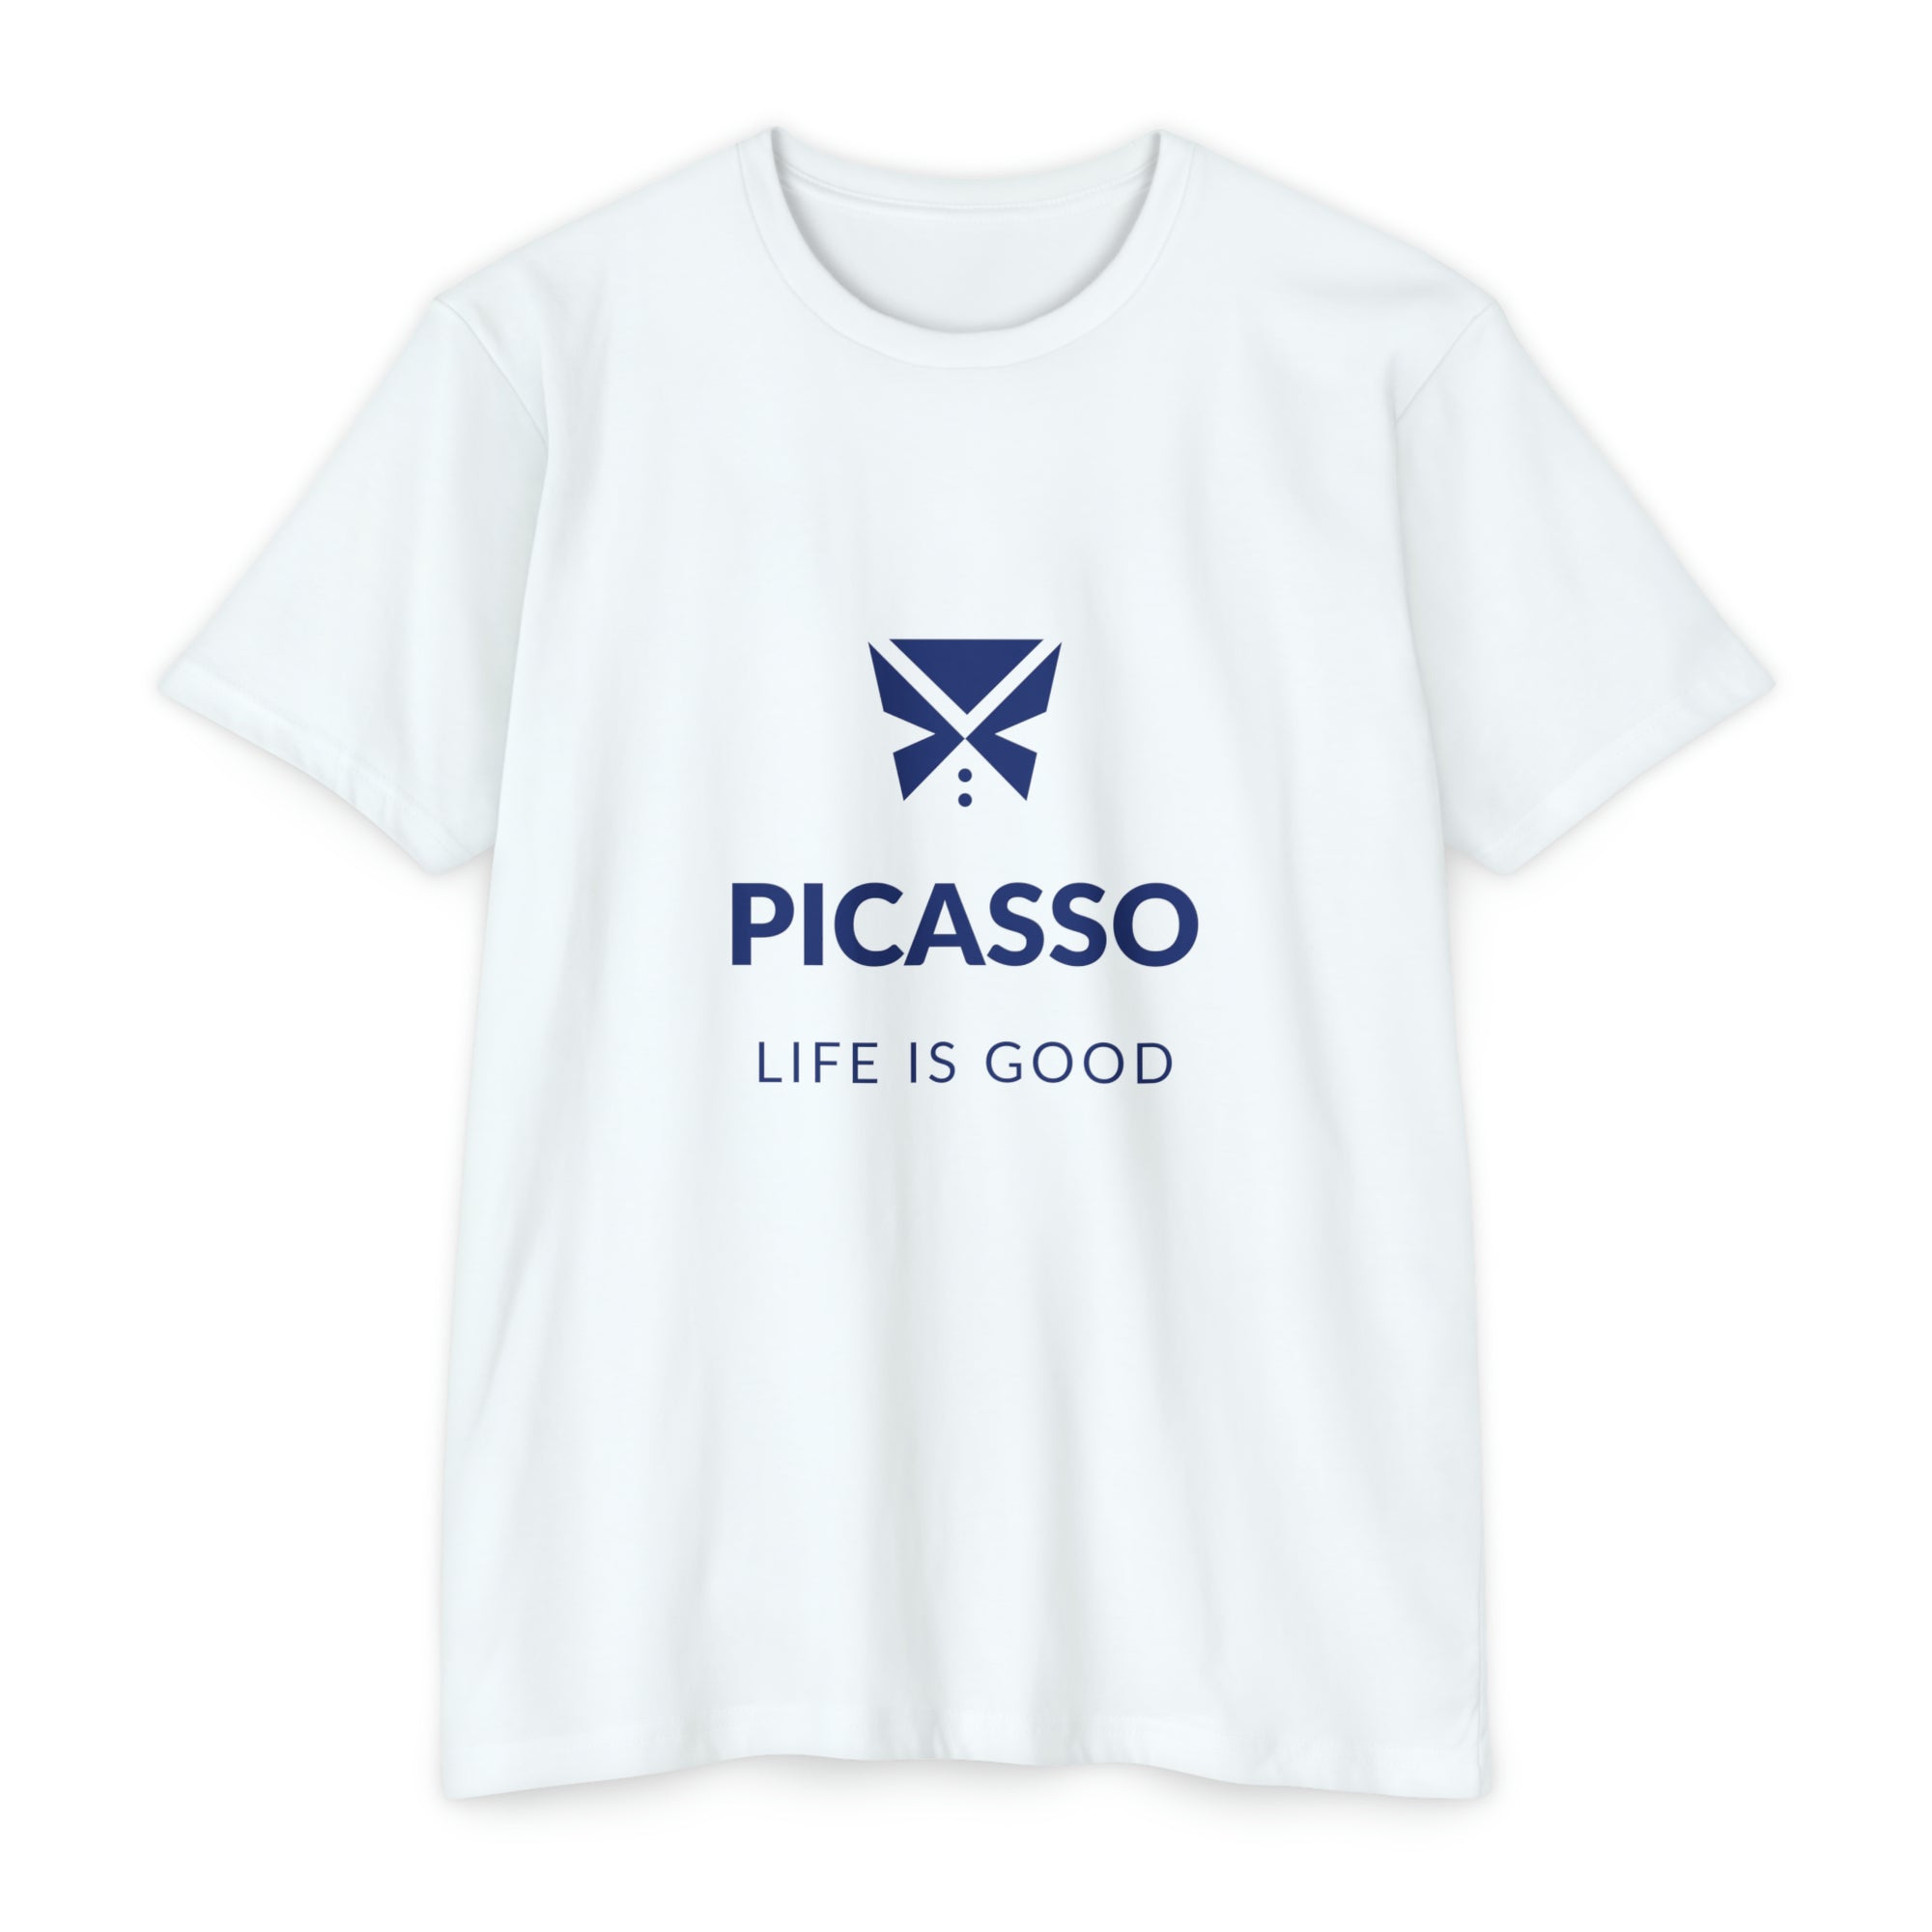 Picasso - Life Is Good T-shirt